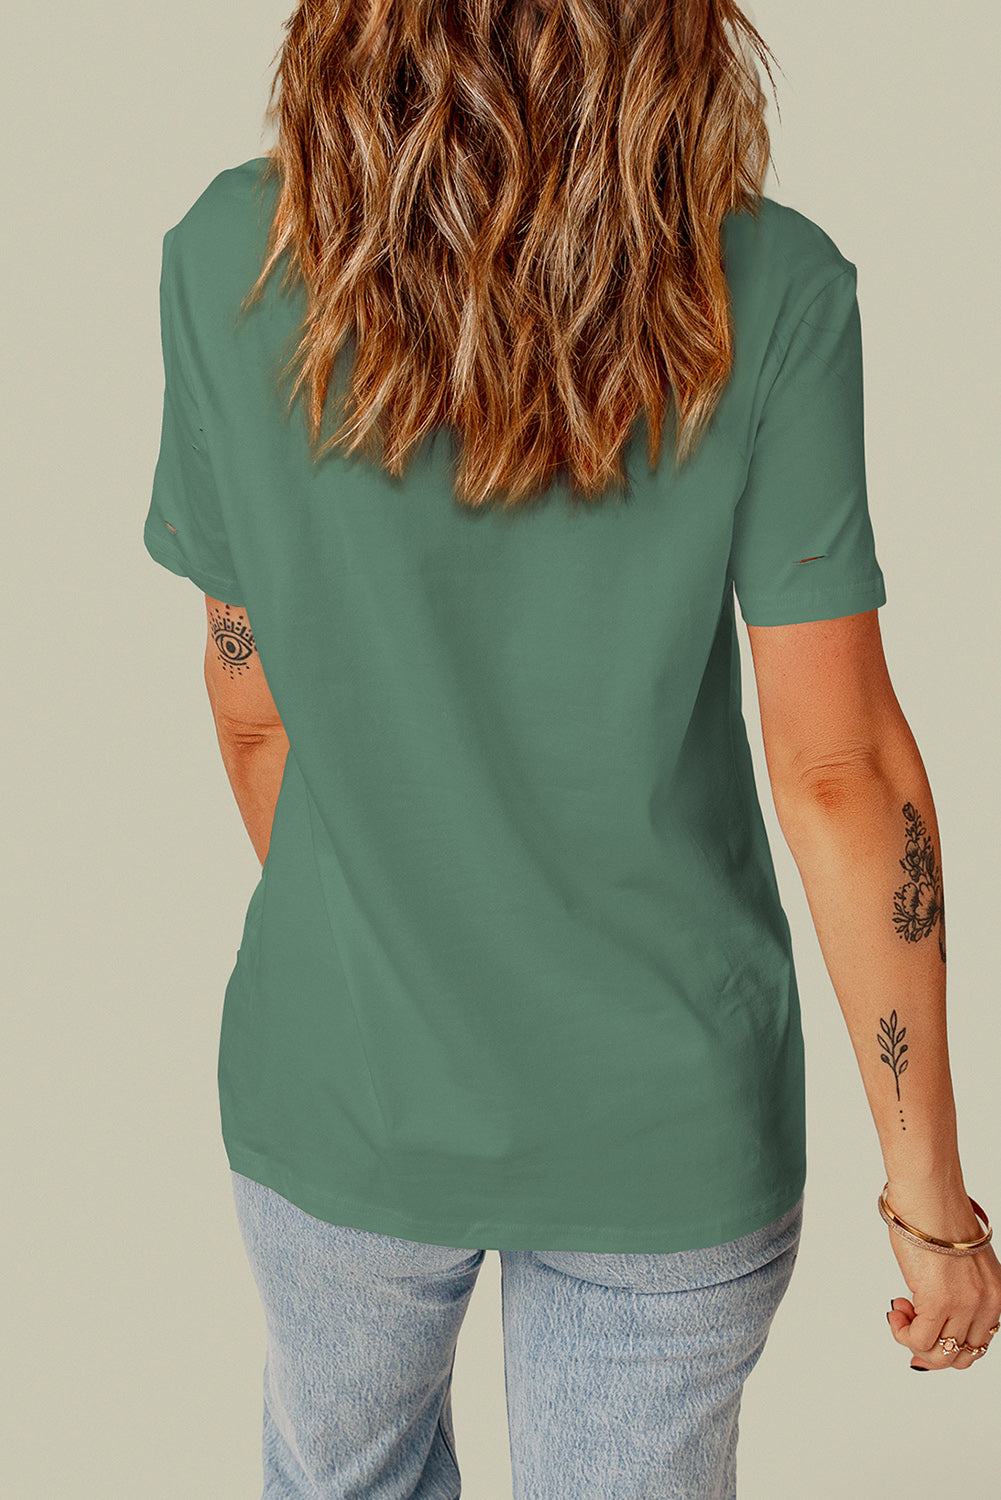 Distressed Round Neck Tee - T-Shirts - Shirts & Tops - 18 - 2024